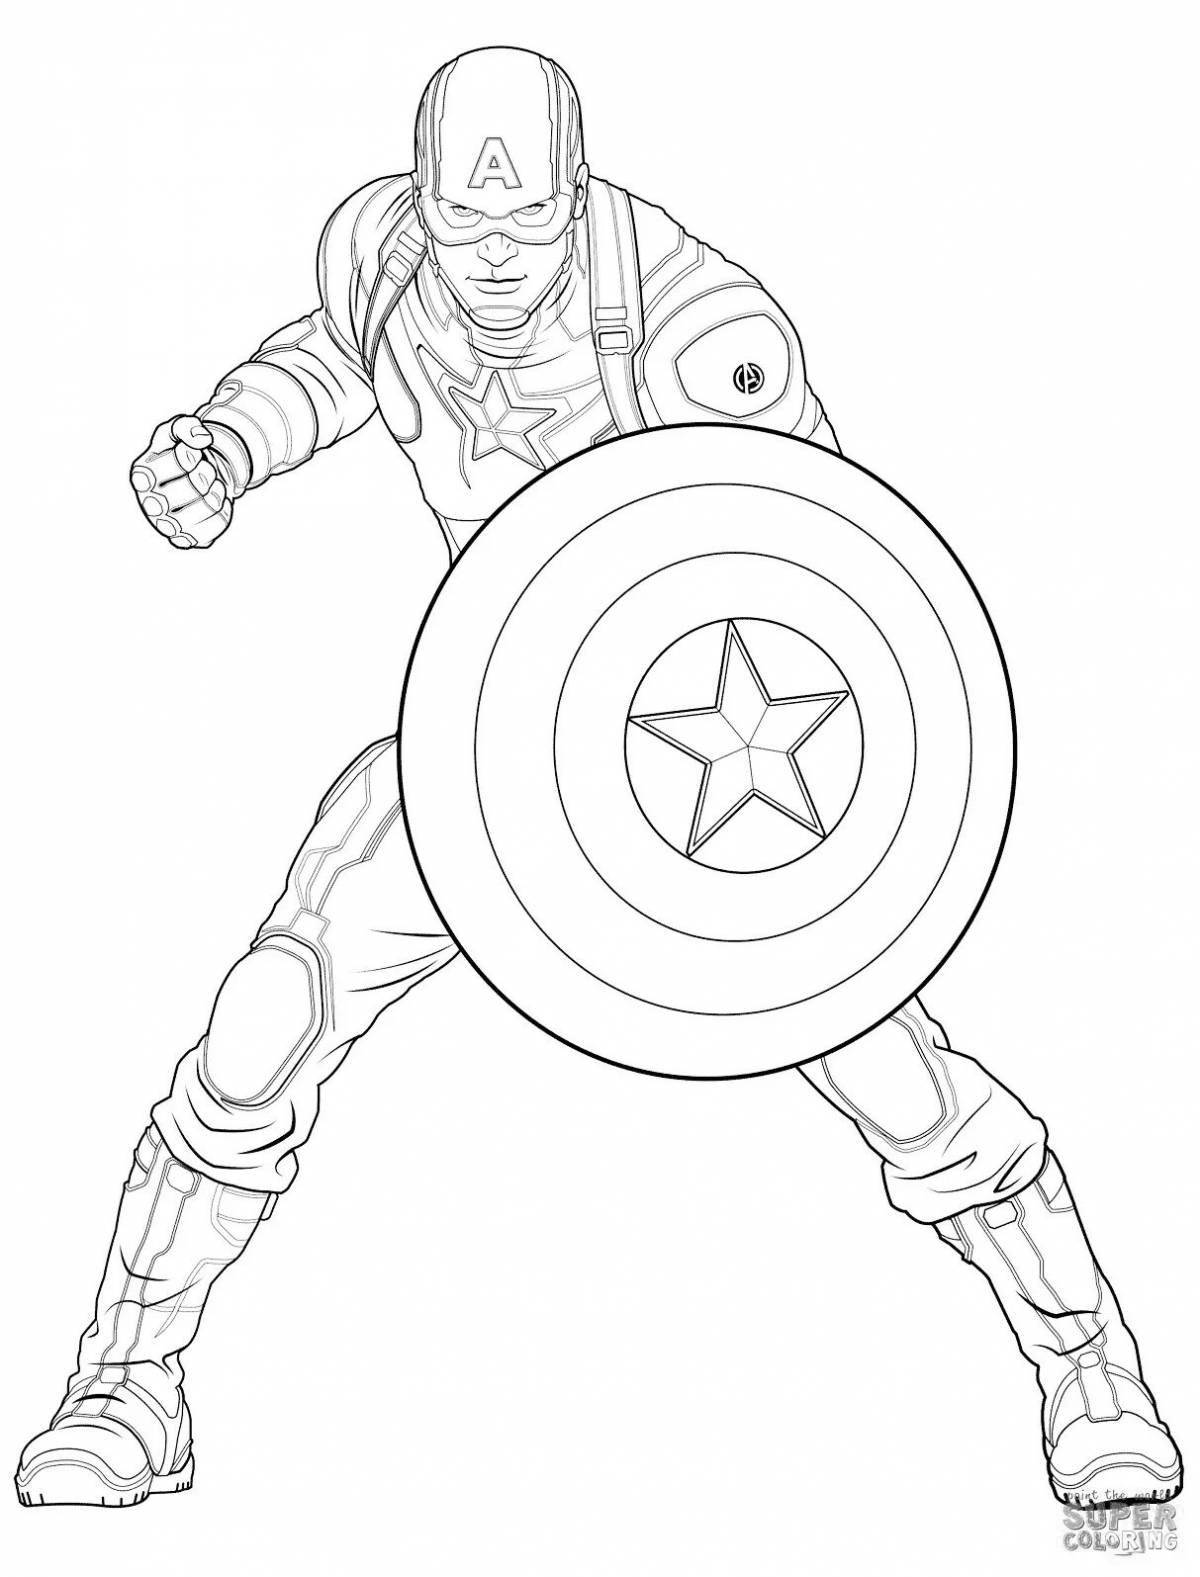 Great spiderman and captain america coloring book